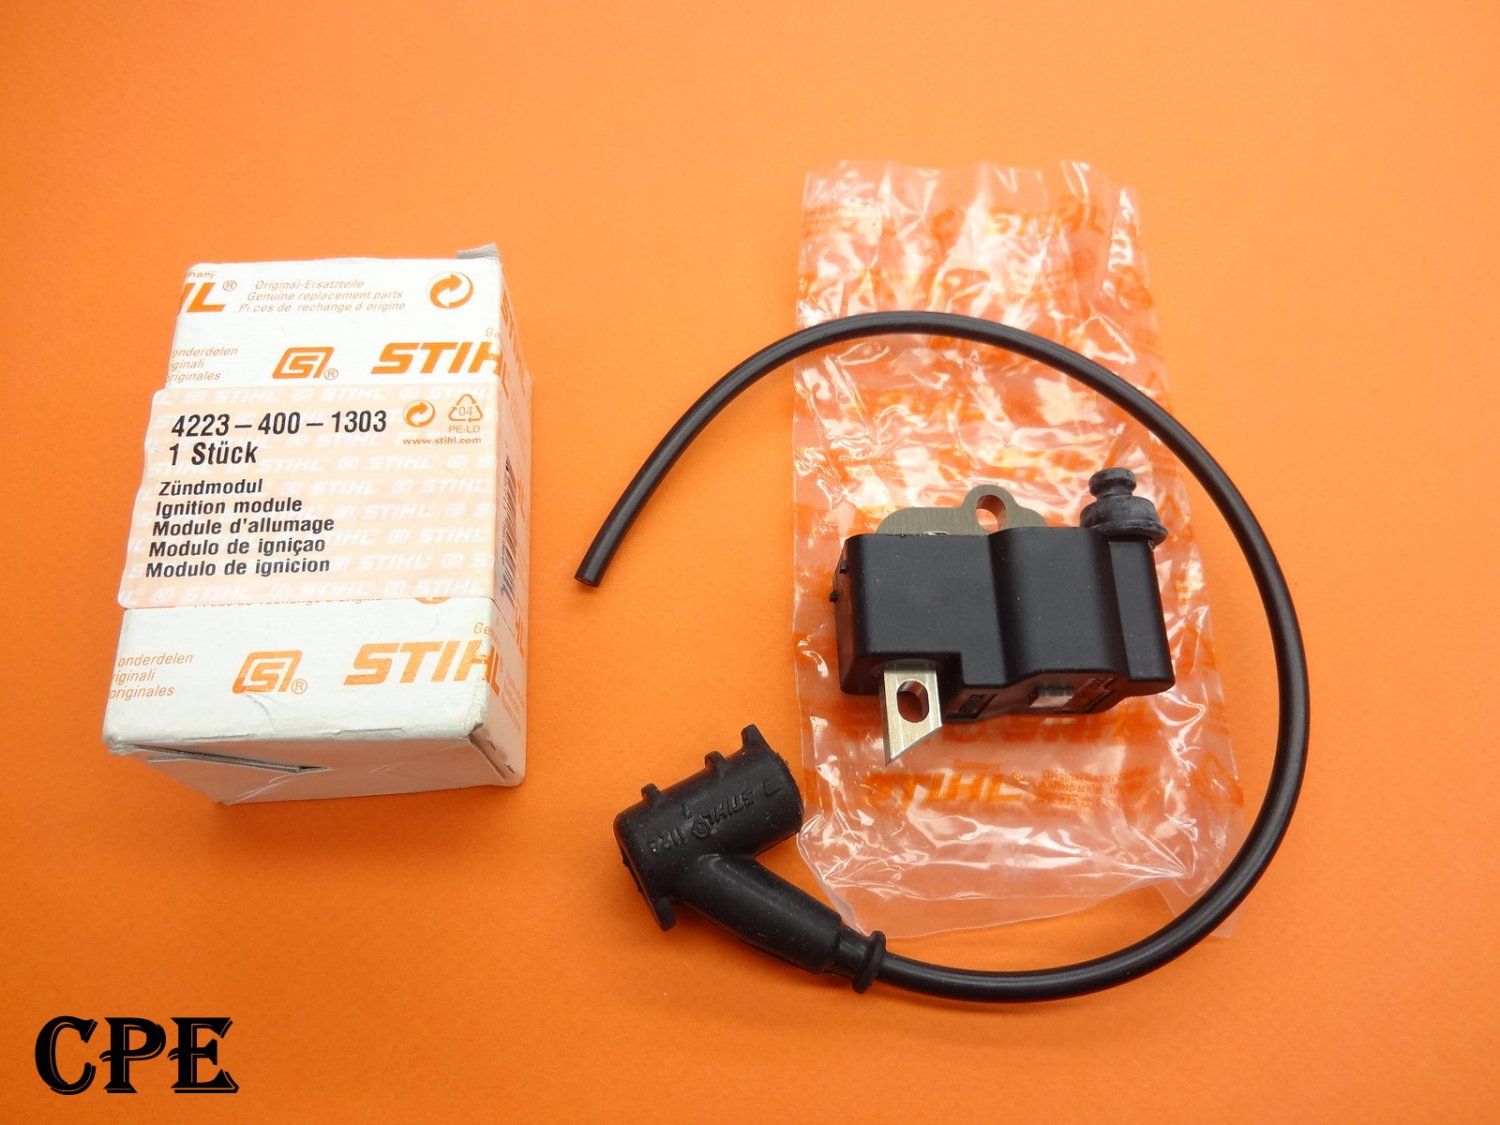 Stihl ts 800 serial number location